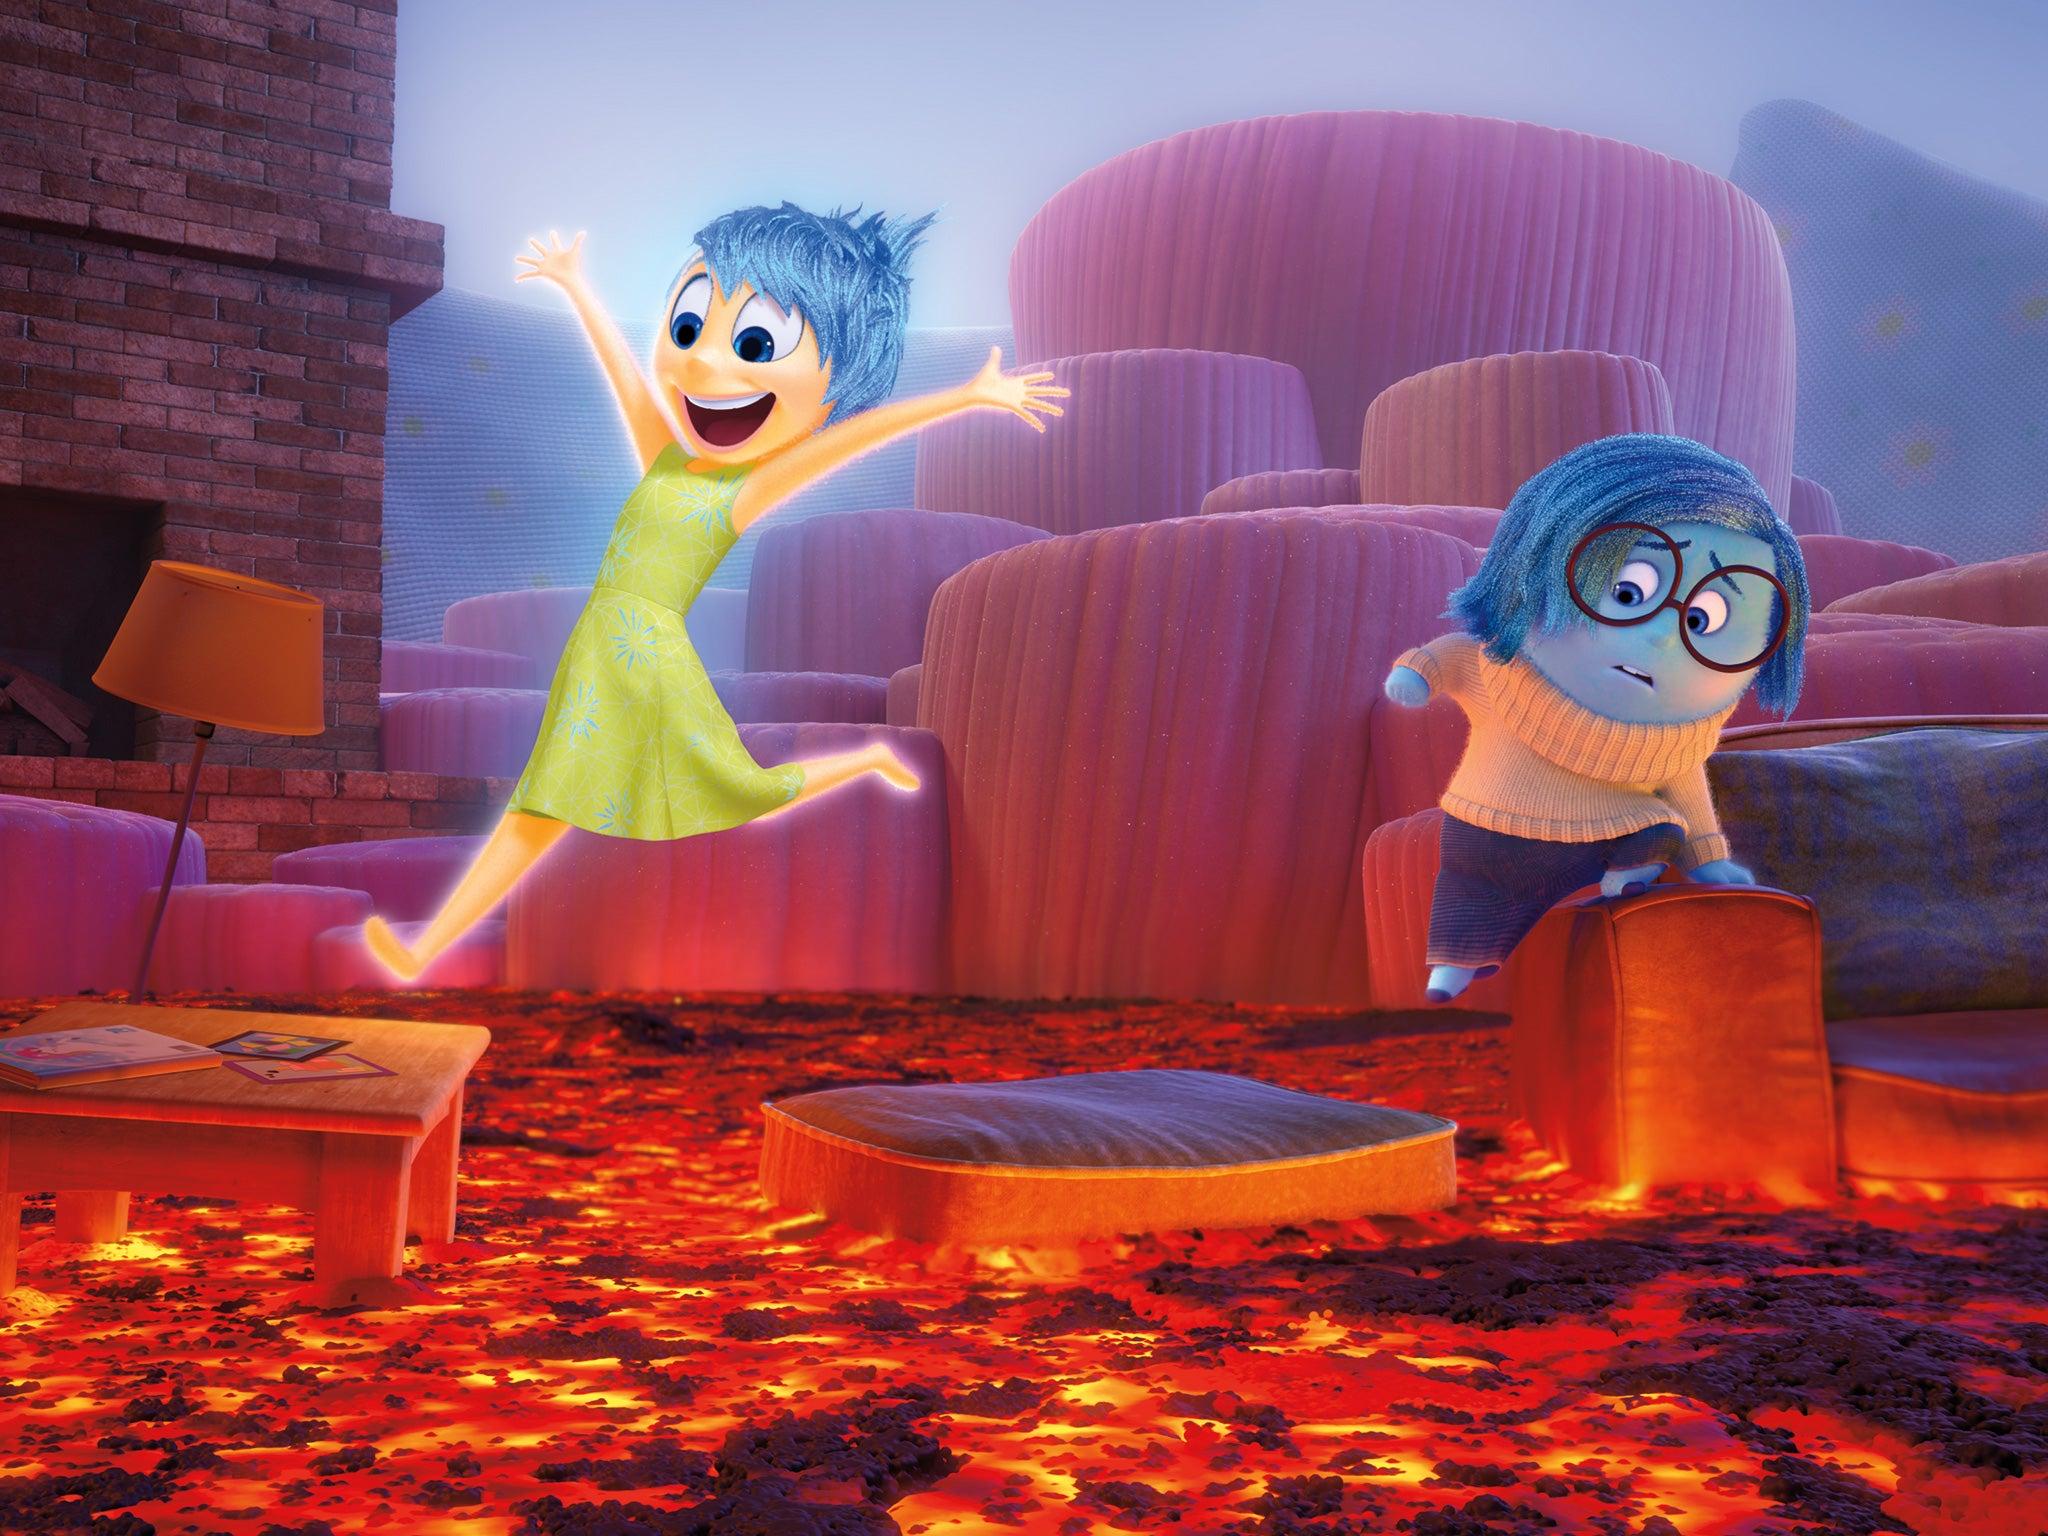 Onward’: Disney Pixar announces cast and release date for new